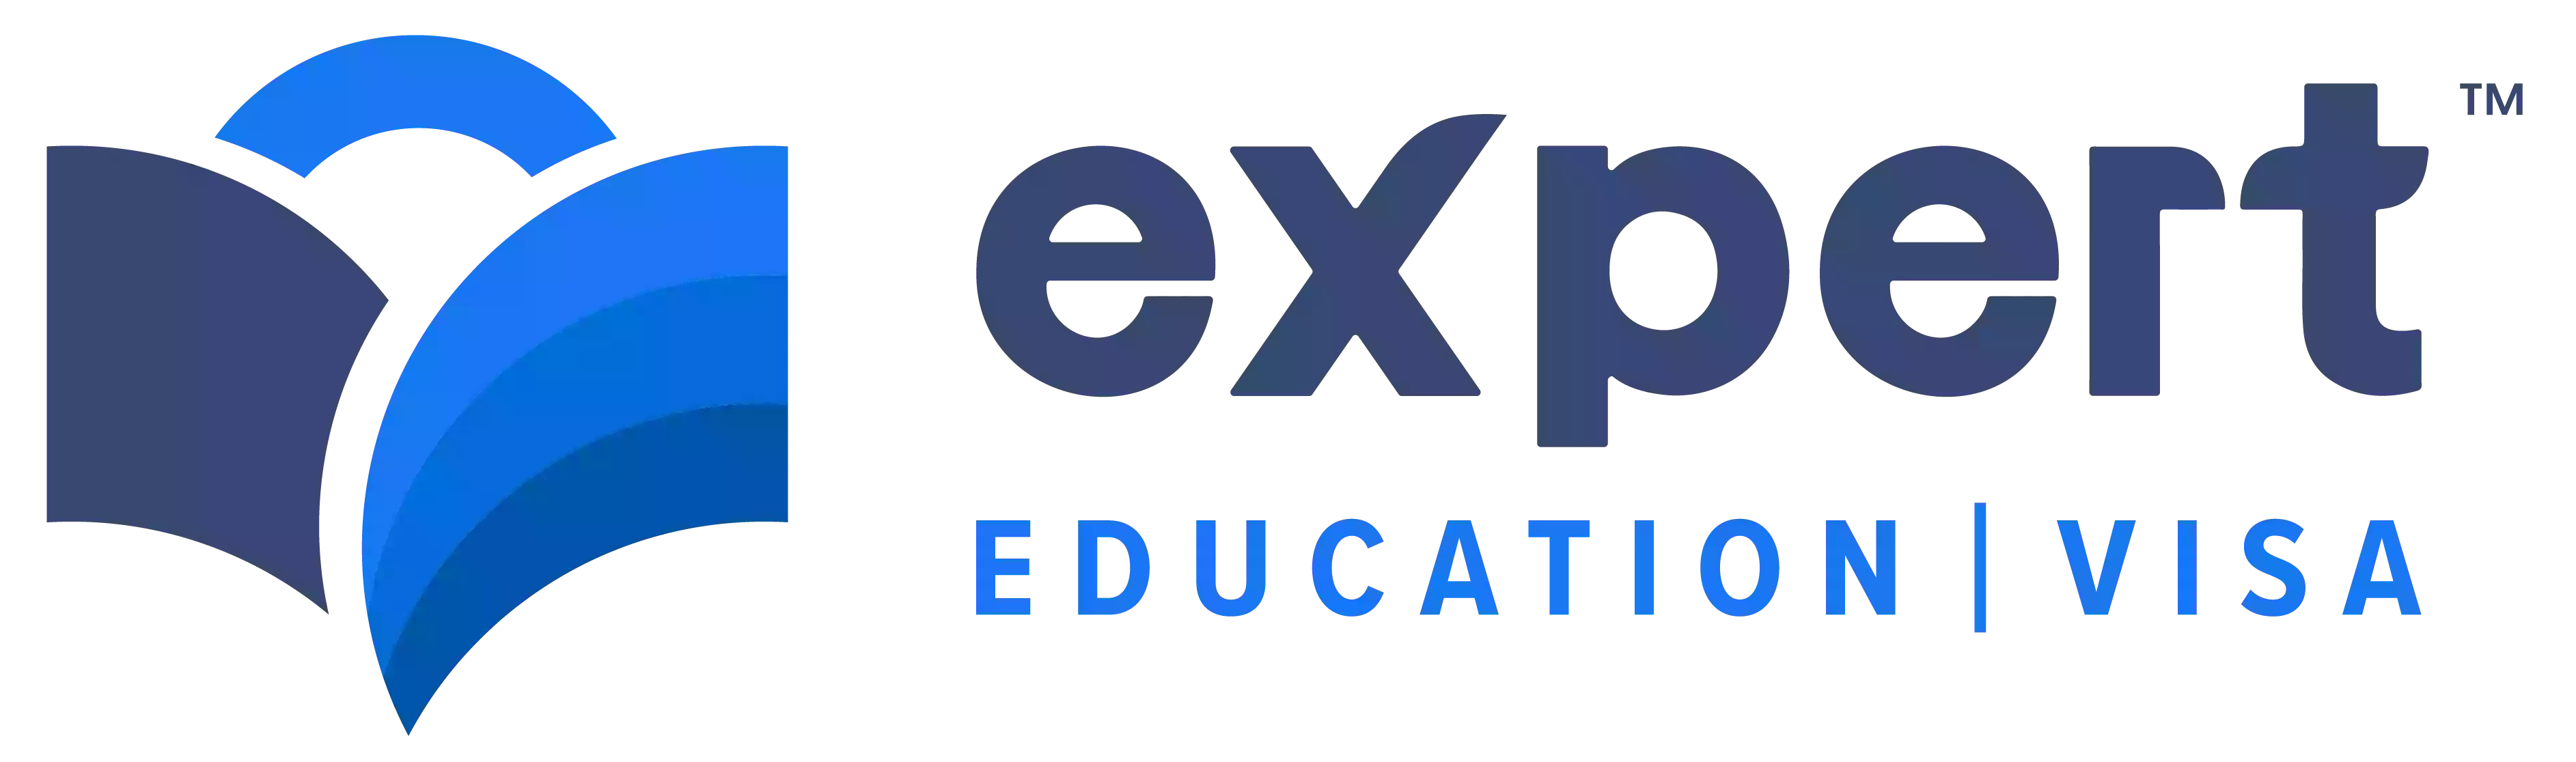 Expert Education and Visa Services Glenroy